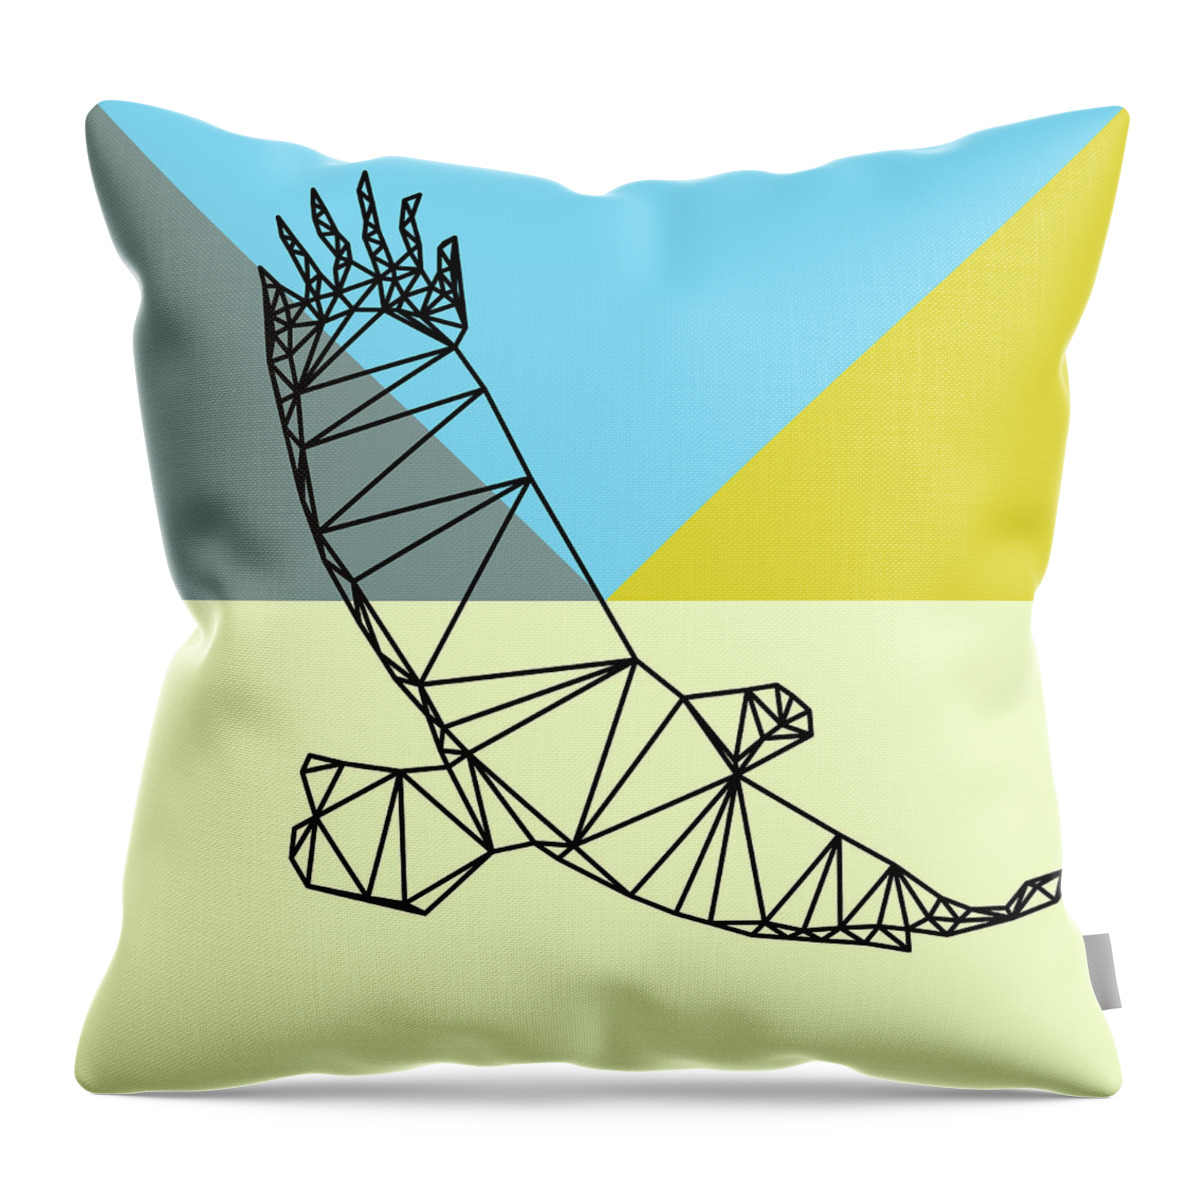 Eagle Throw Pillow featuring the digital art Party Eagle by Naxart Studio